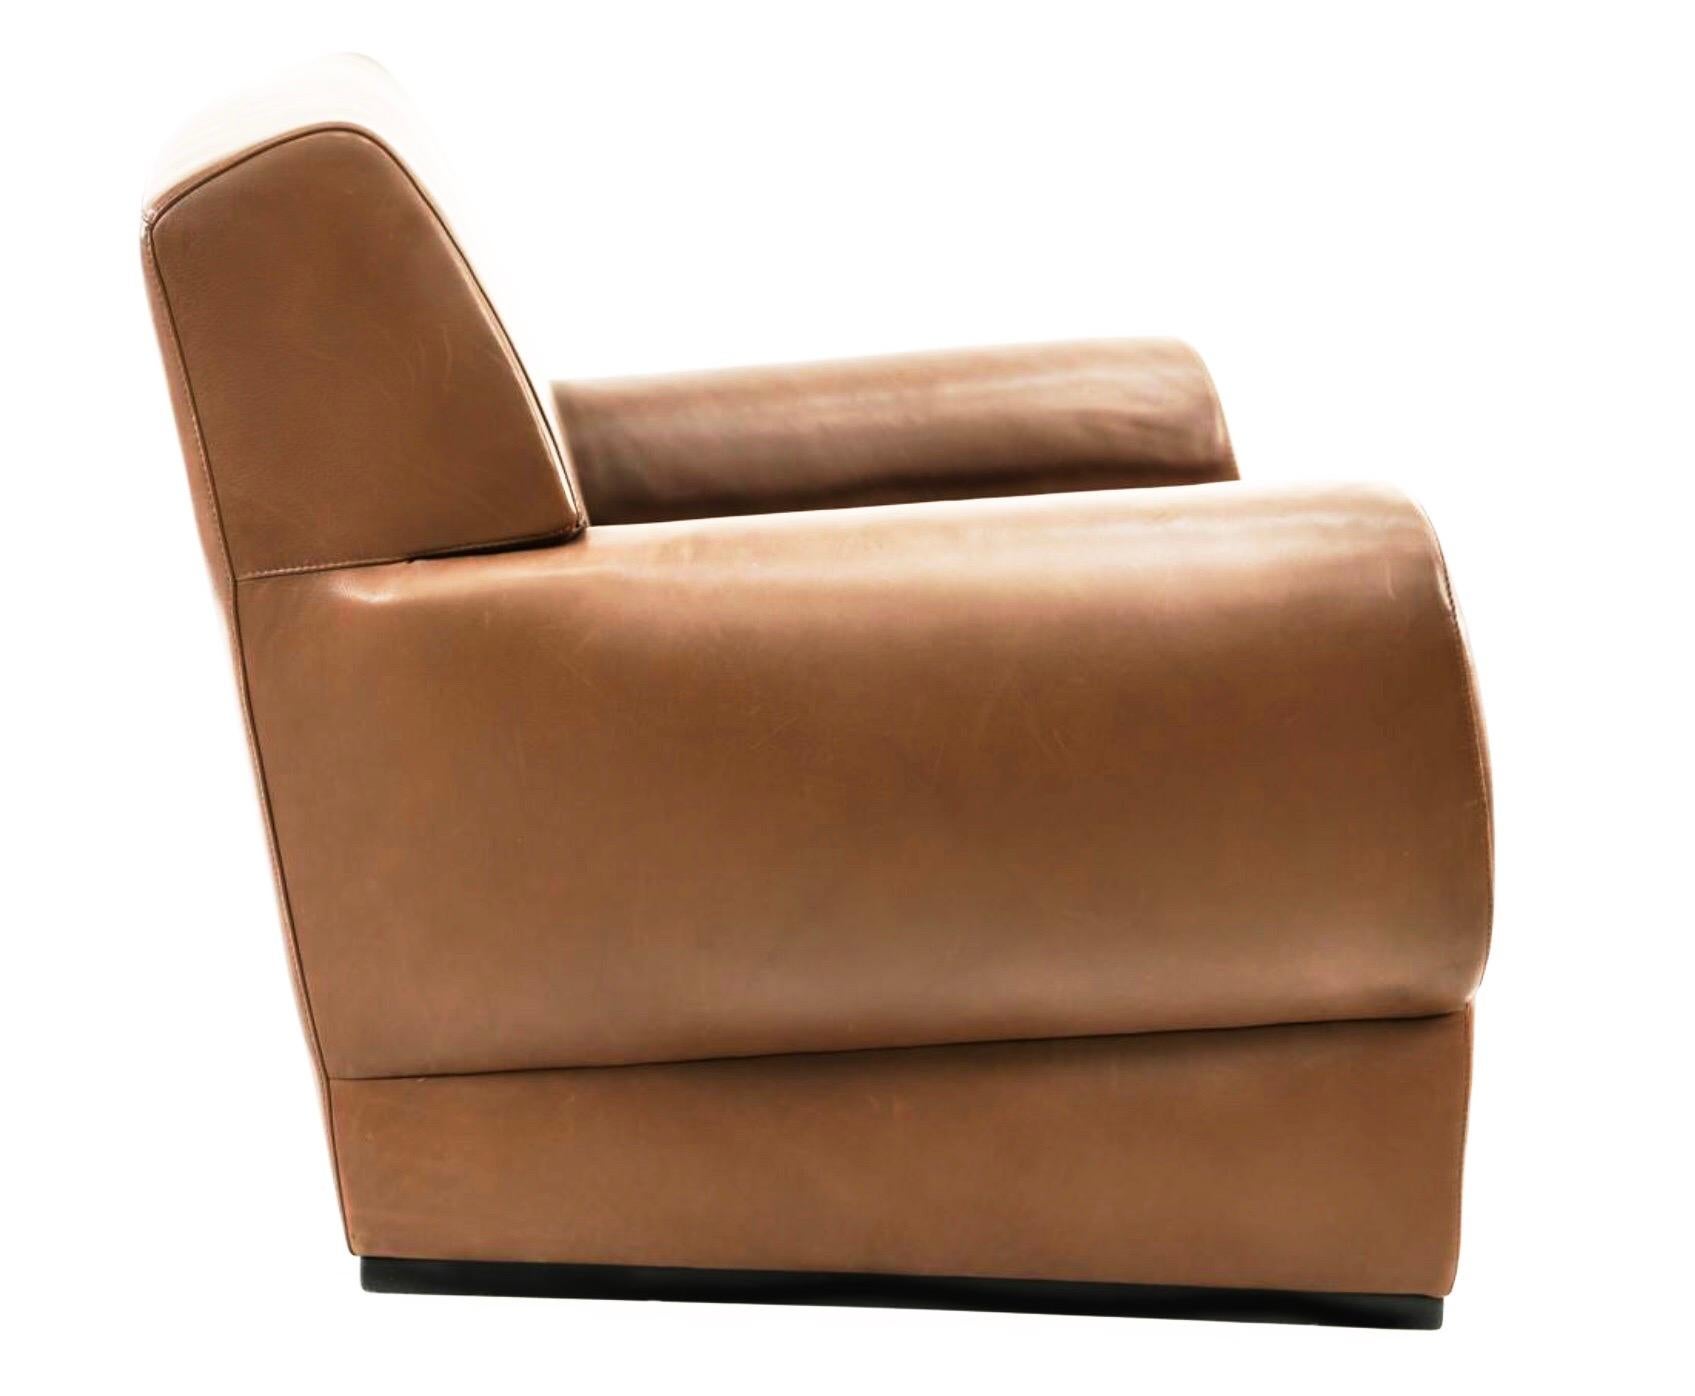 Giorgio Armani Casa brown leather Metropolian club chair. Geometric Deco armchair. Gorgeous, substantial piece, sculptural / geometric form, gorgeous lines. Softed square back and gently rounded arms. Stunning patina. Armani label. MSRP over 12,000